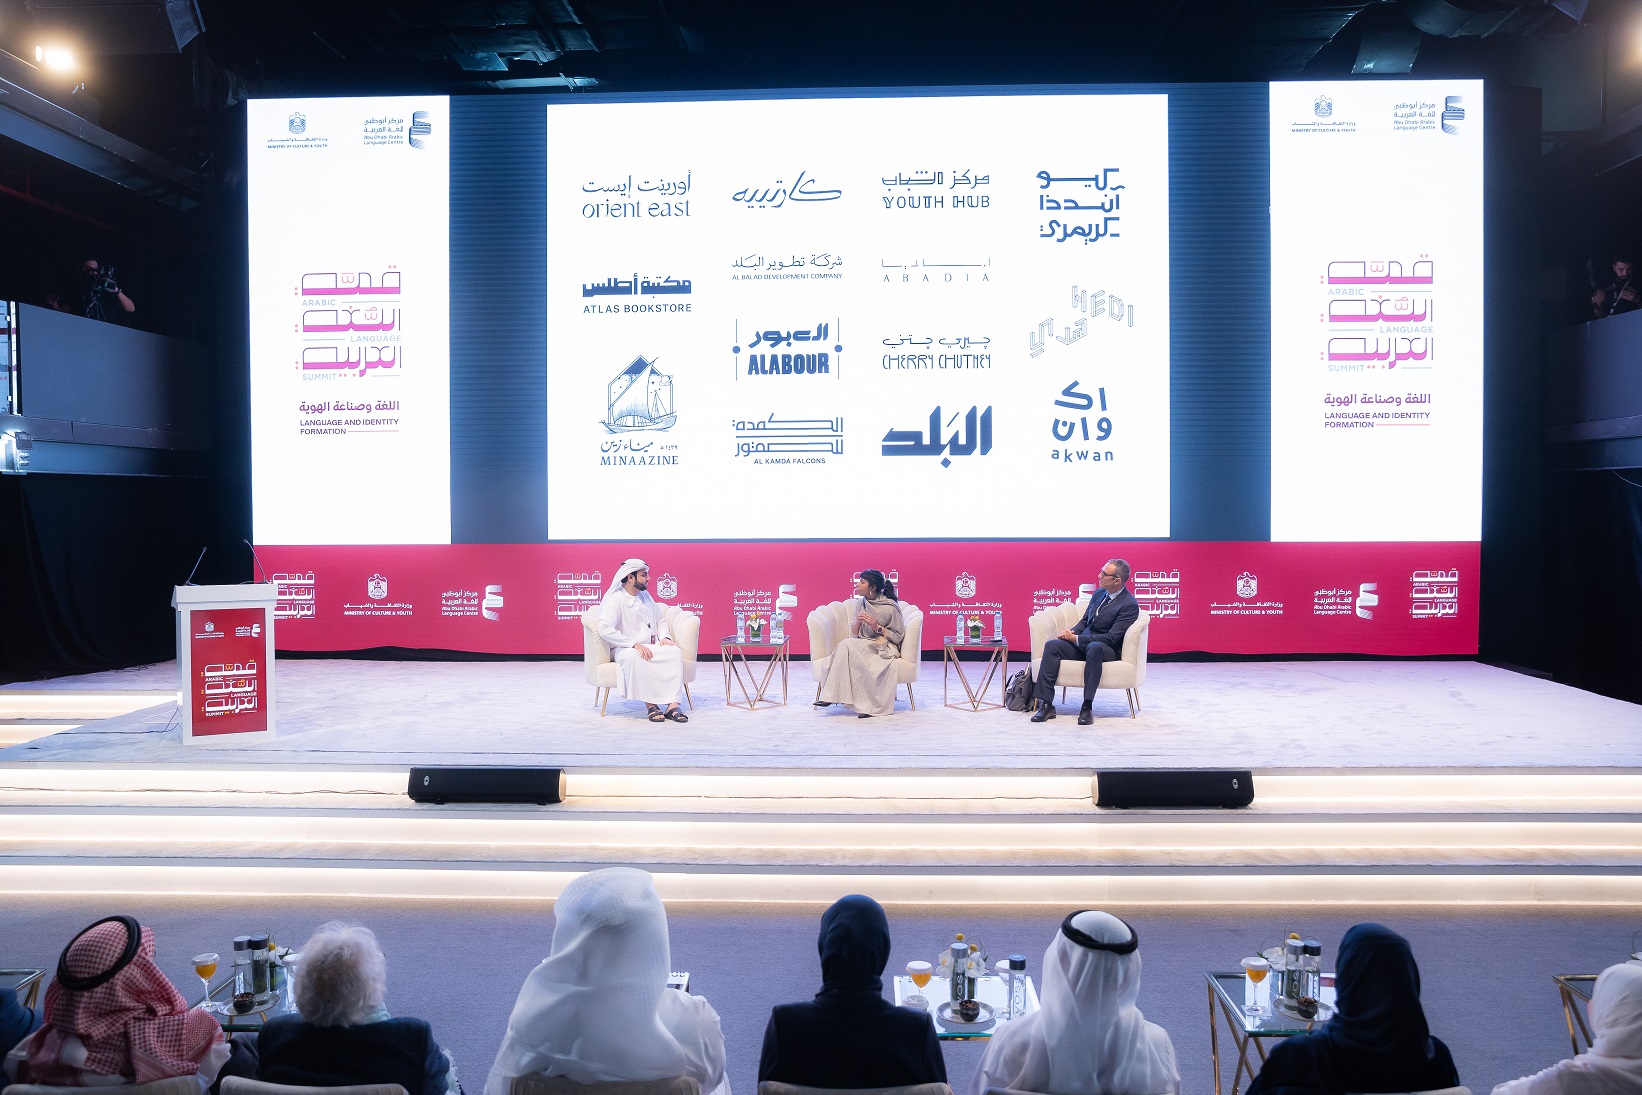 Arabic Language Summit introduces the aesthetics of Arabic calligraphy and its role as a tool of communication